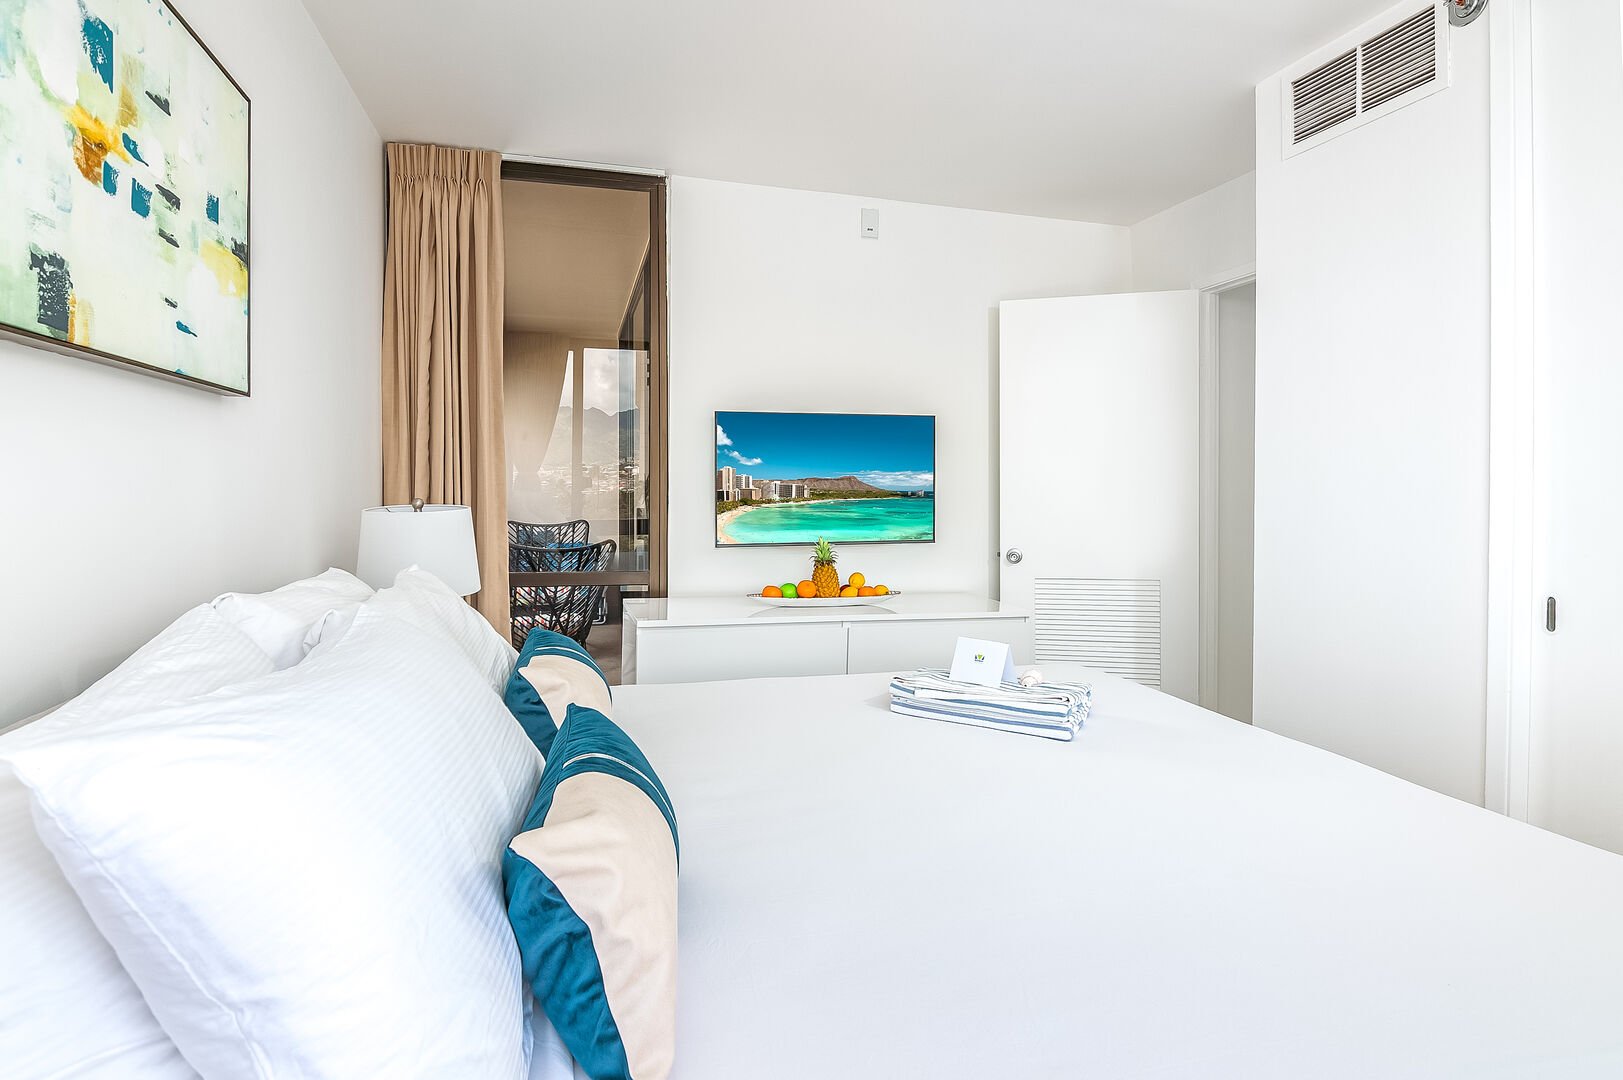 The master bedroom with a king-size bed and a 43'' smart TV.